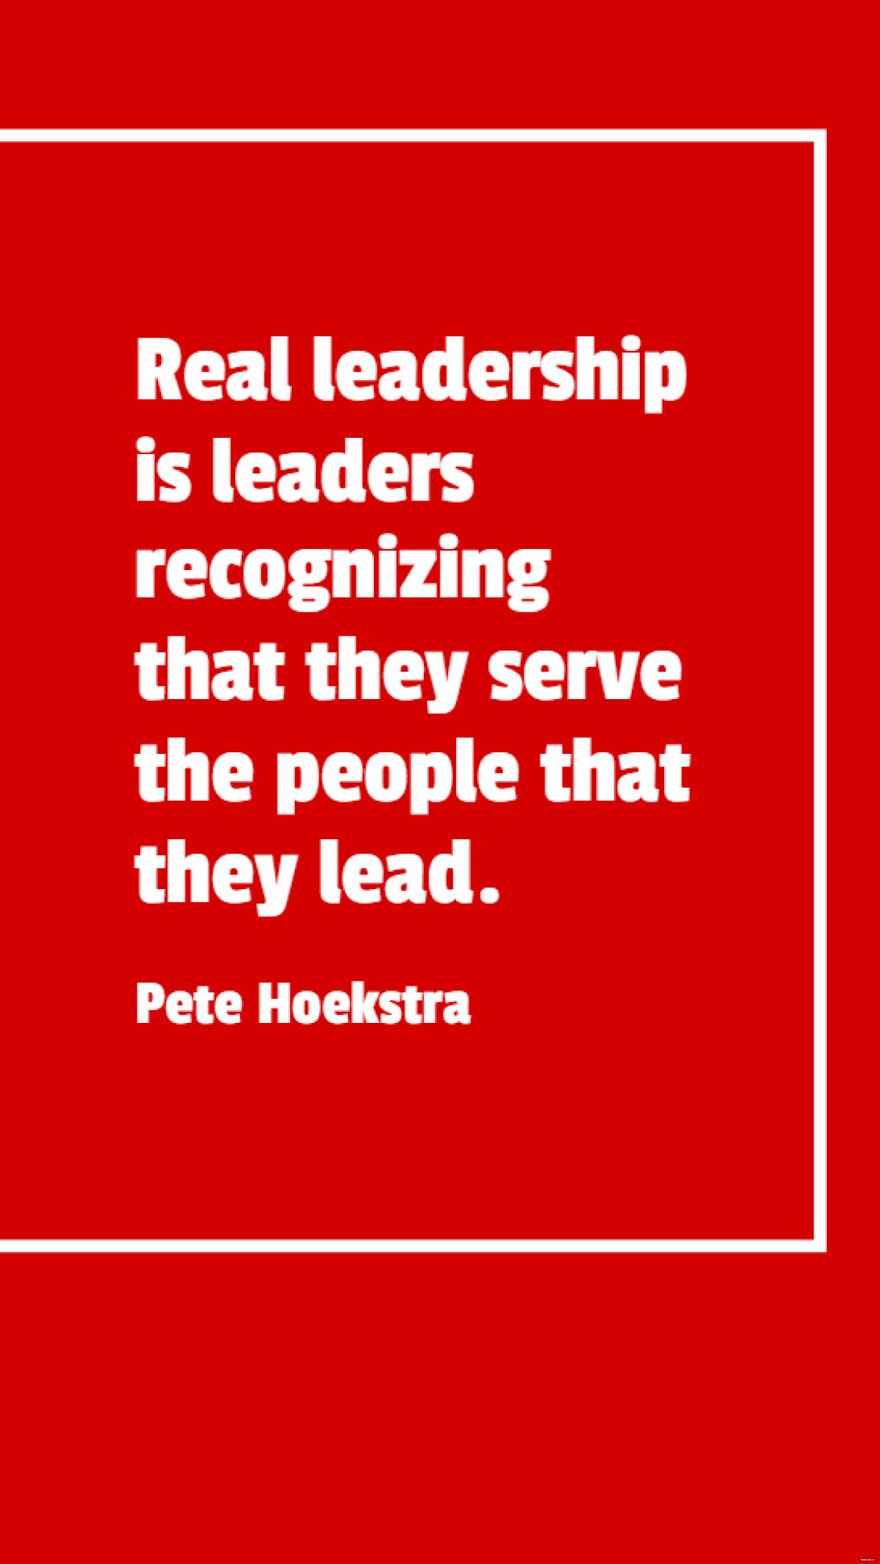 Pete Hoekstra - Real leadership is leaders recognizing that they serve the people that they lead.